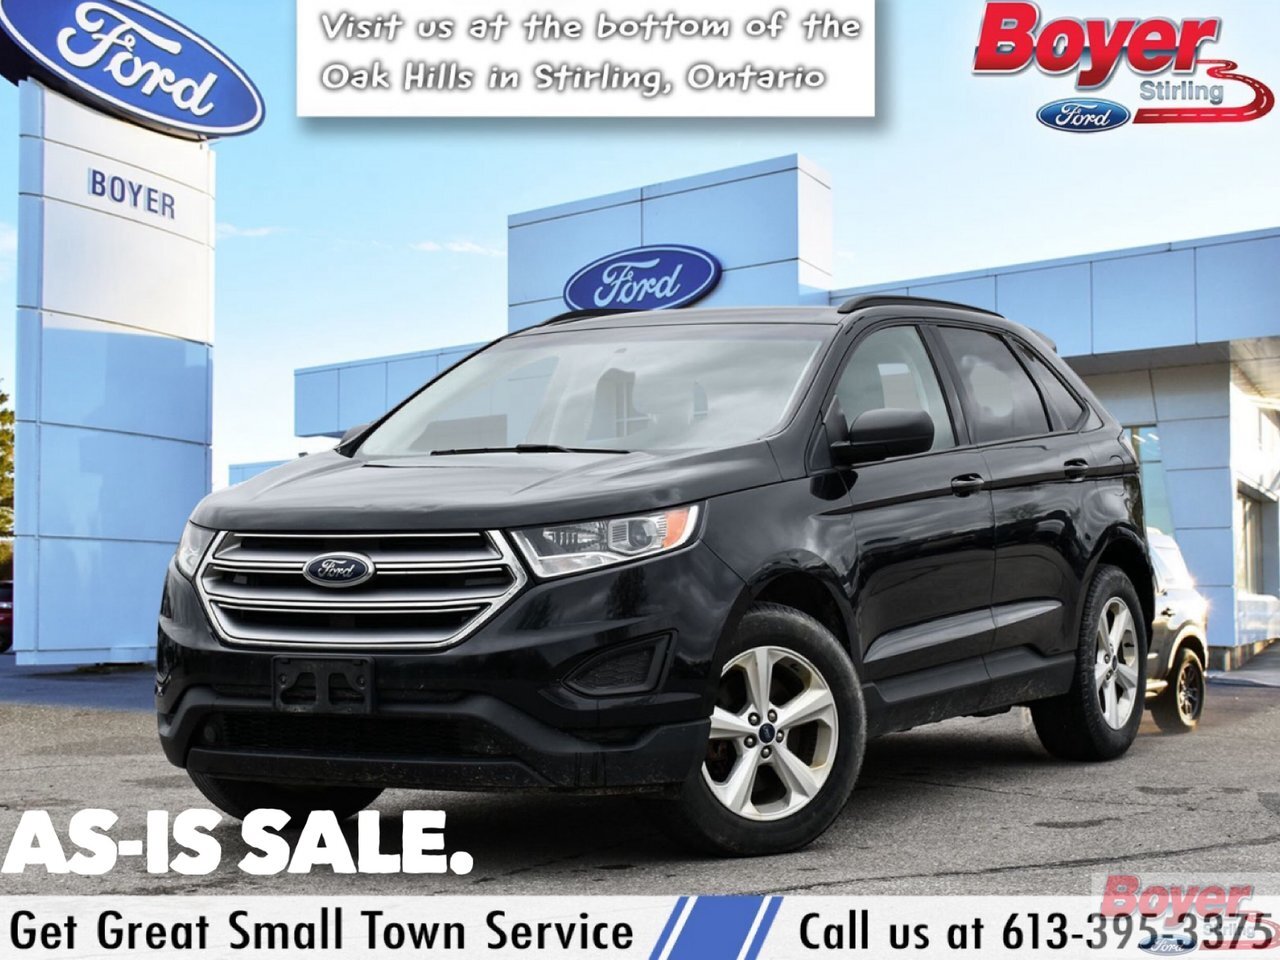 2017 Ford Edge SE AS-IS SALE,GREAT PRICE! / 